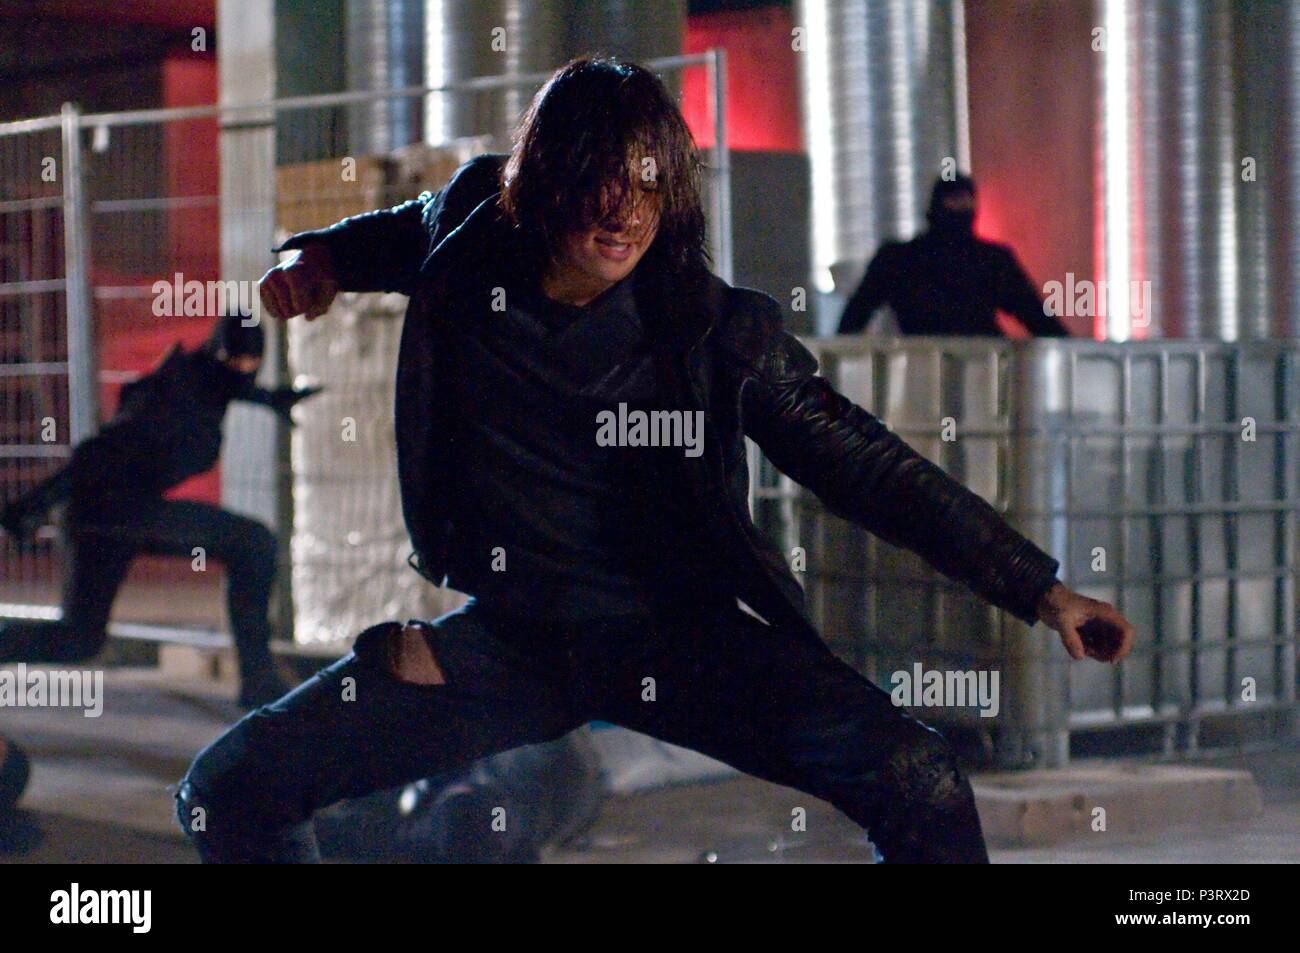 Ninja Assassin HD Wallpapers and Backgrounds